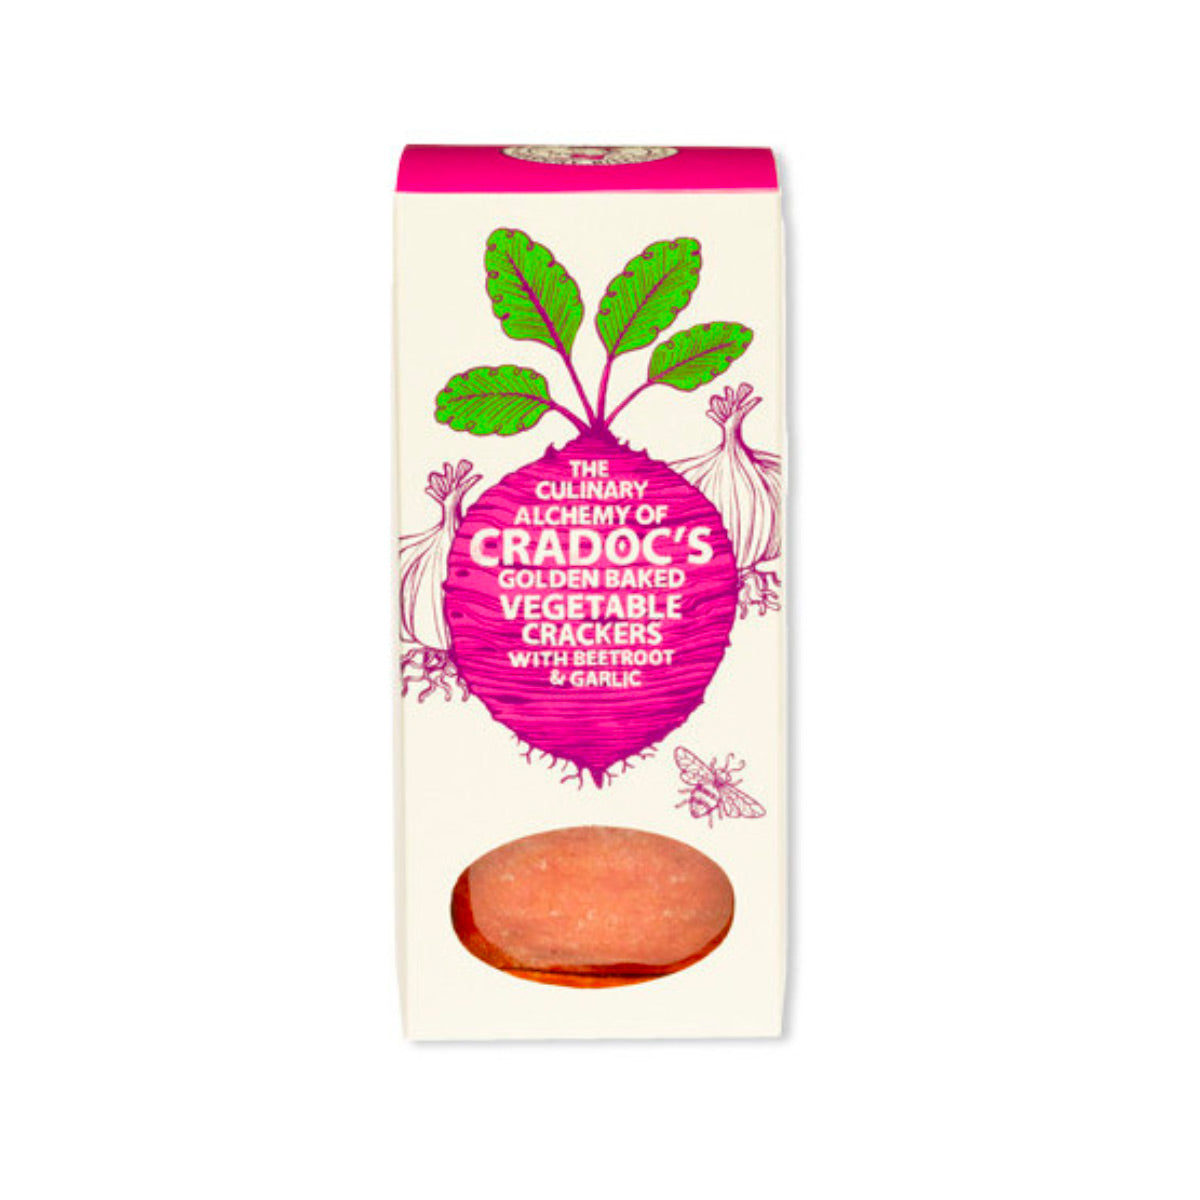 Cradoc's Vegetable crackers with Beetroot and Garlic 80g